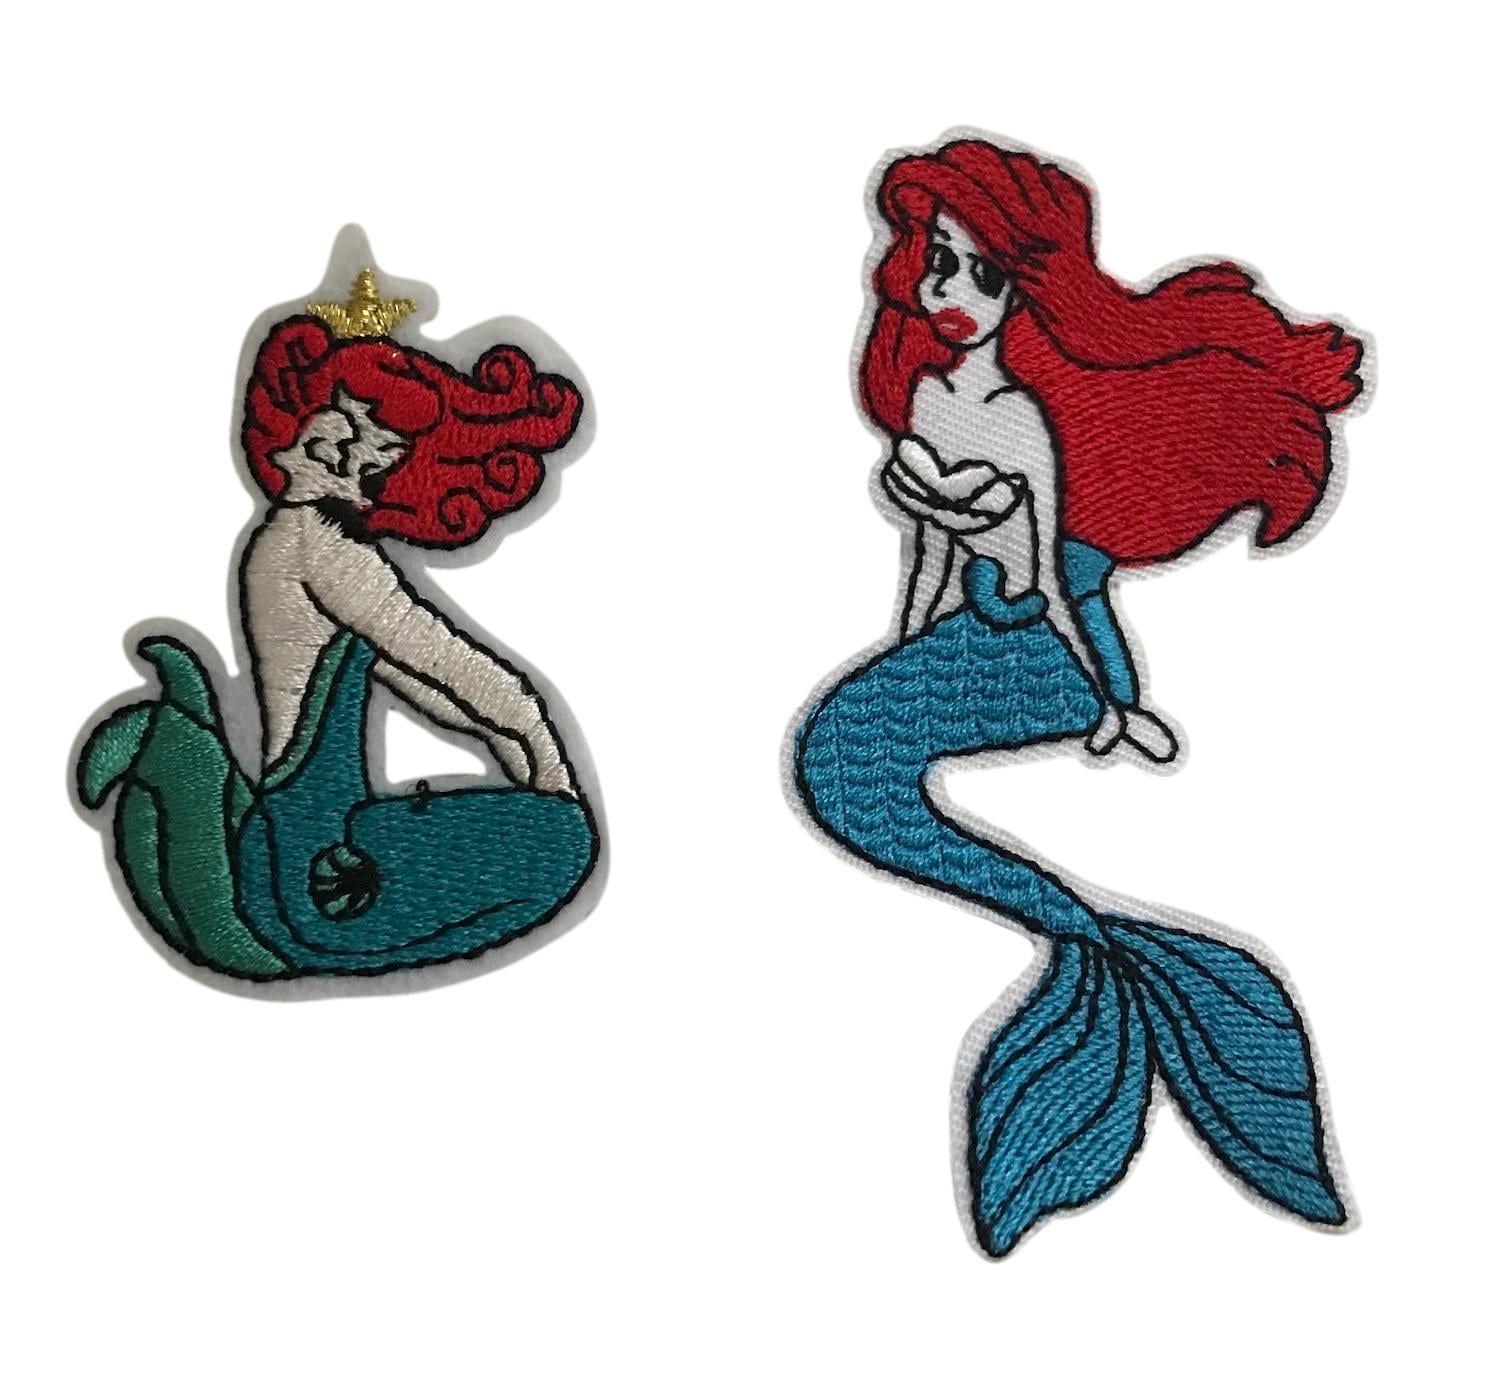 Sea Foam Green Embroidered Mermaid Large Patch 